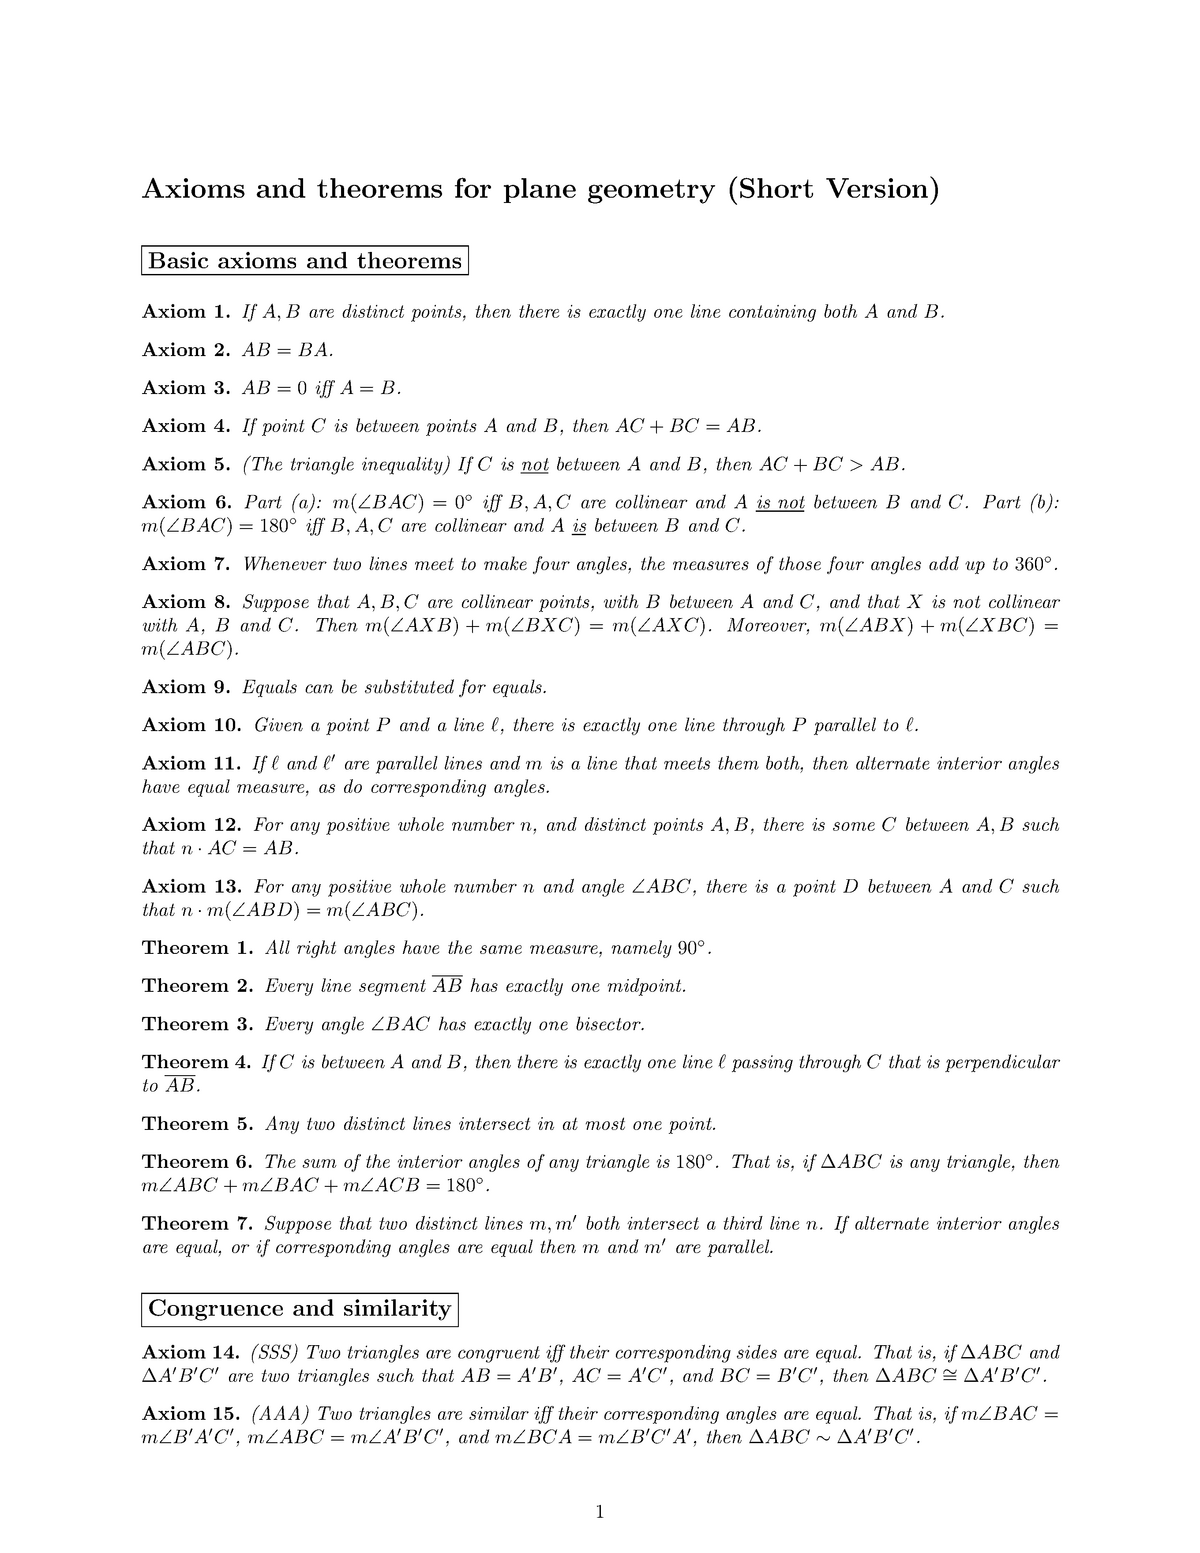 Summary Axioms And Theorems For Plane Geometry Short